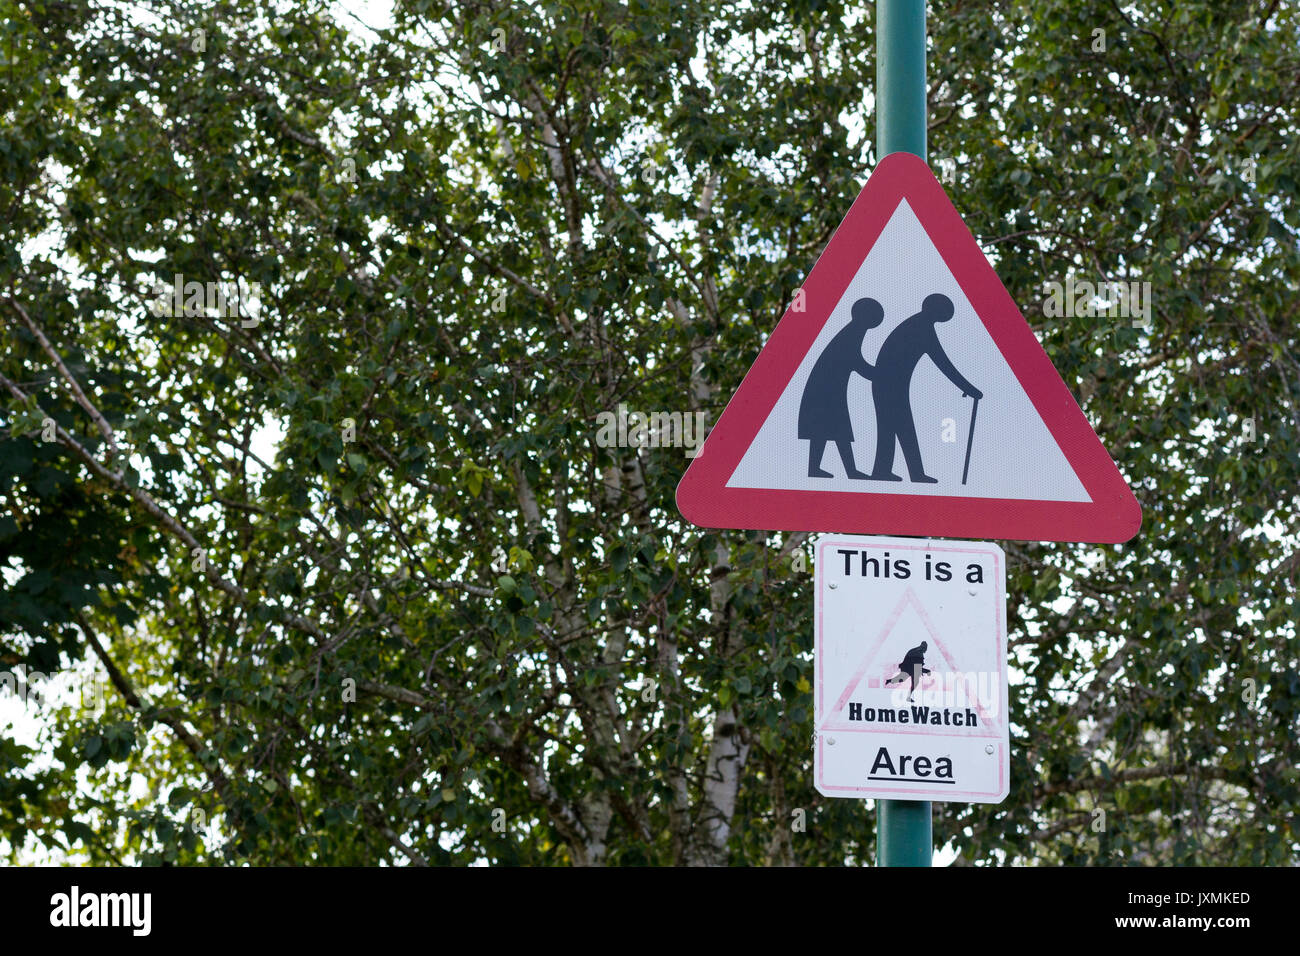 Old people warning red triangular road sign, This is a HomeWatch Area sign, Dorset, UK Stock Photo